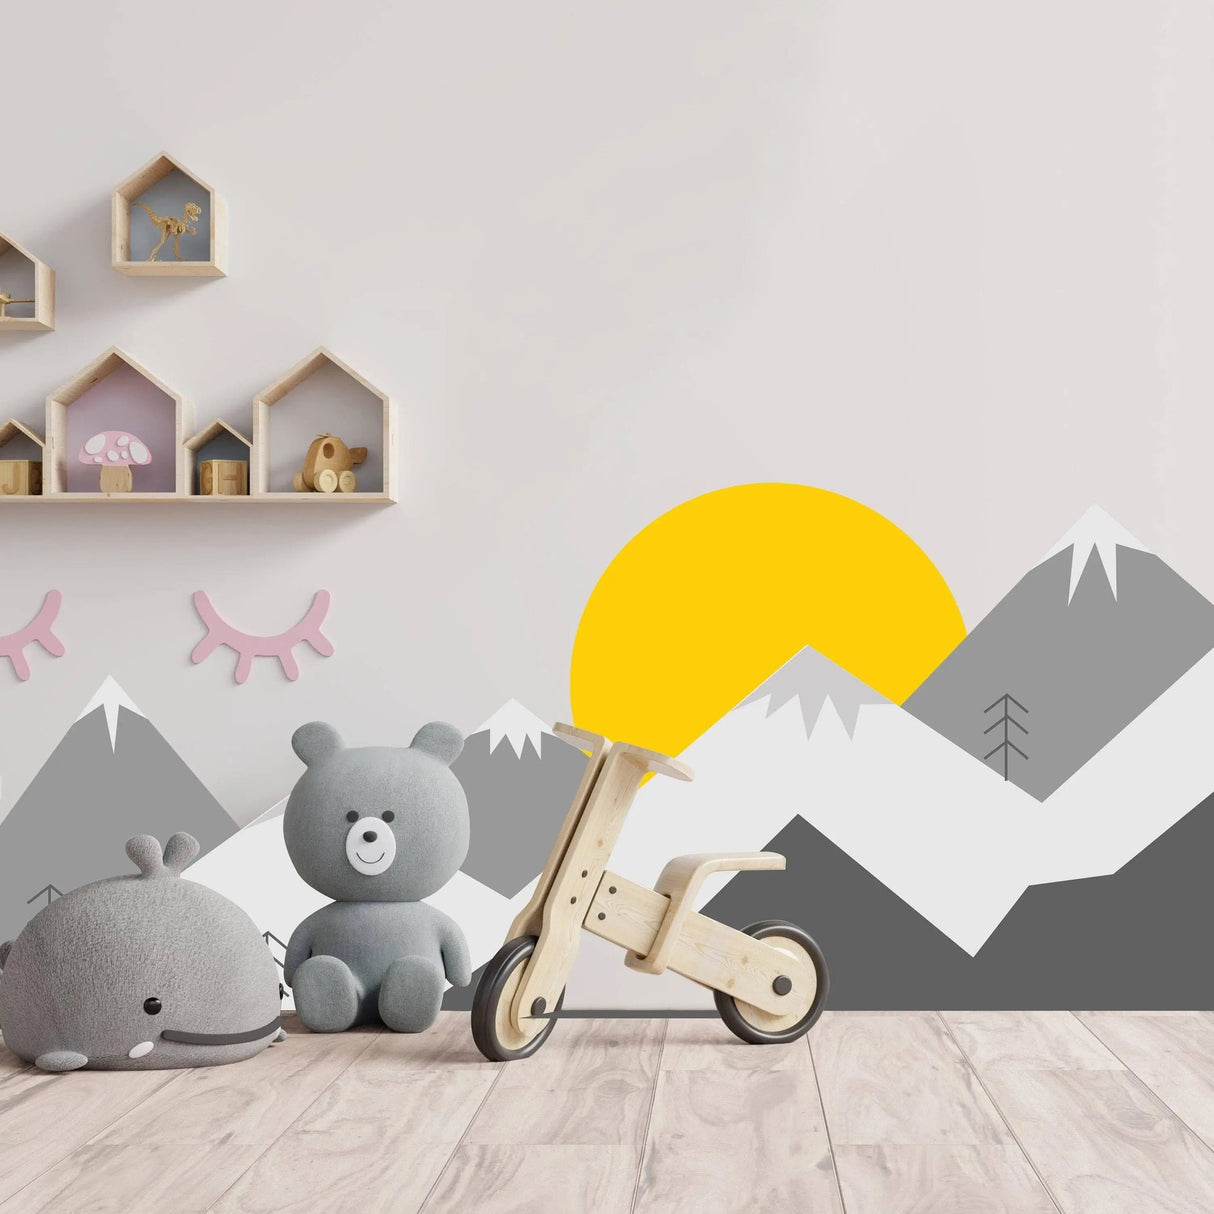 Mountain Wall Decal - Mountains Vinyl Sticker Decor For Nursery Baby Kid Boy Room - Huge Travel Mural Decoration Wallpaper Theme - Decords